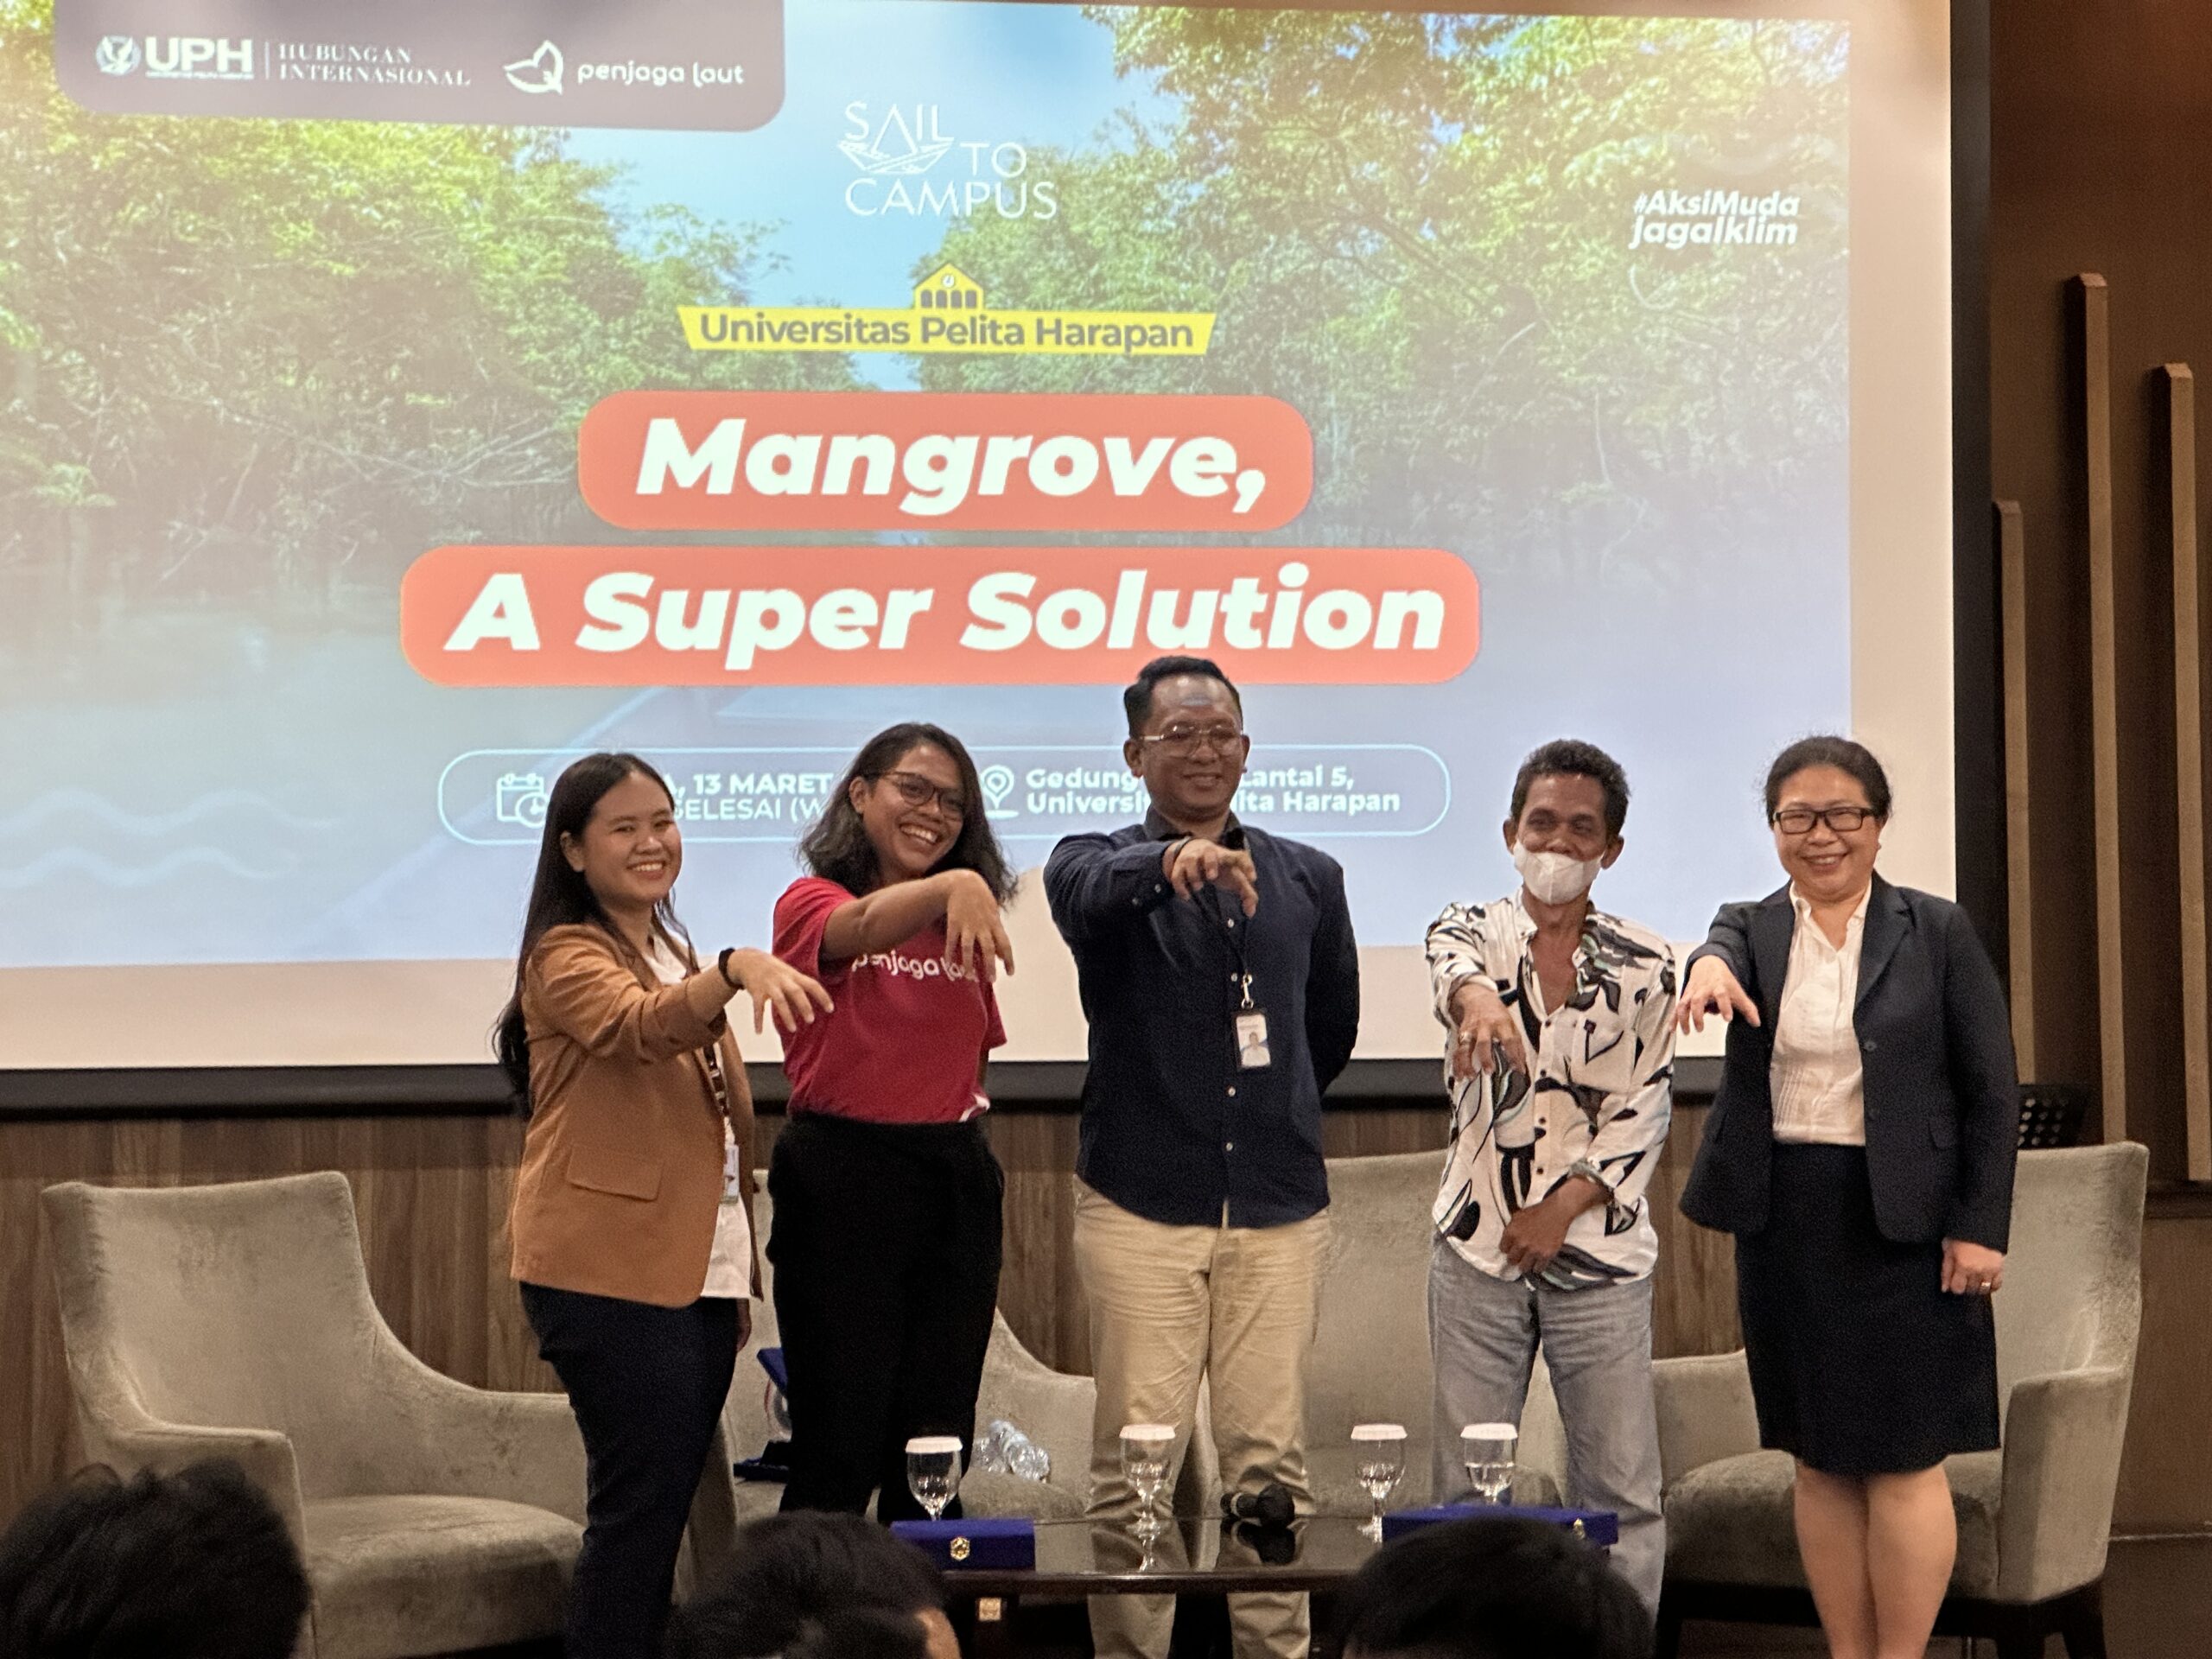 STC UPH: Mangrove, a Super Solution